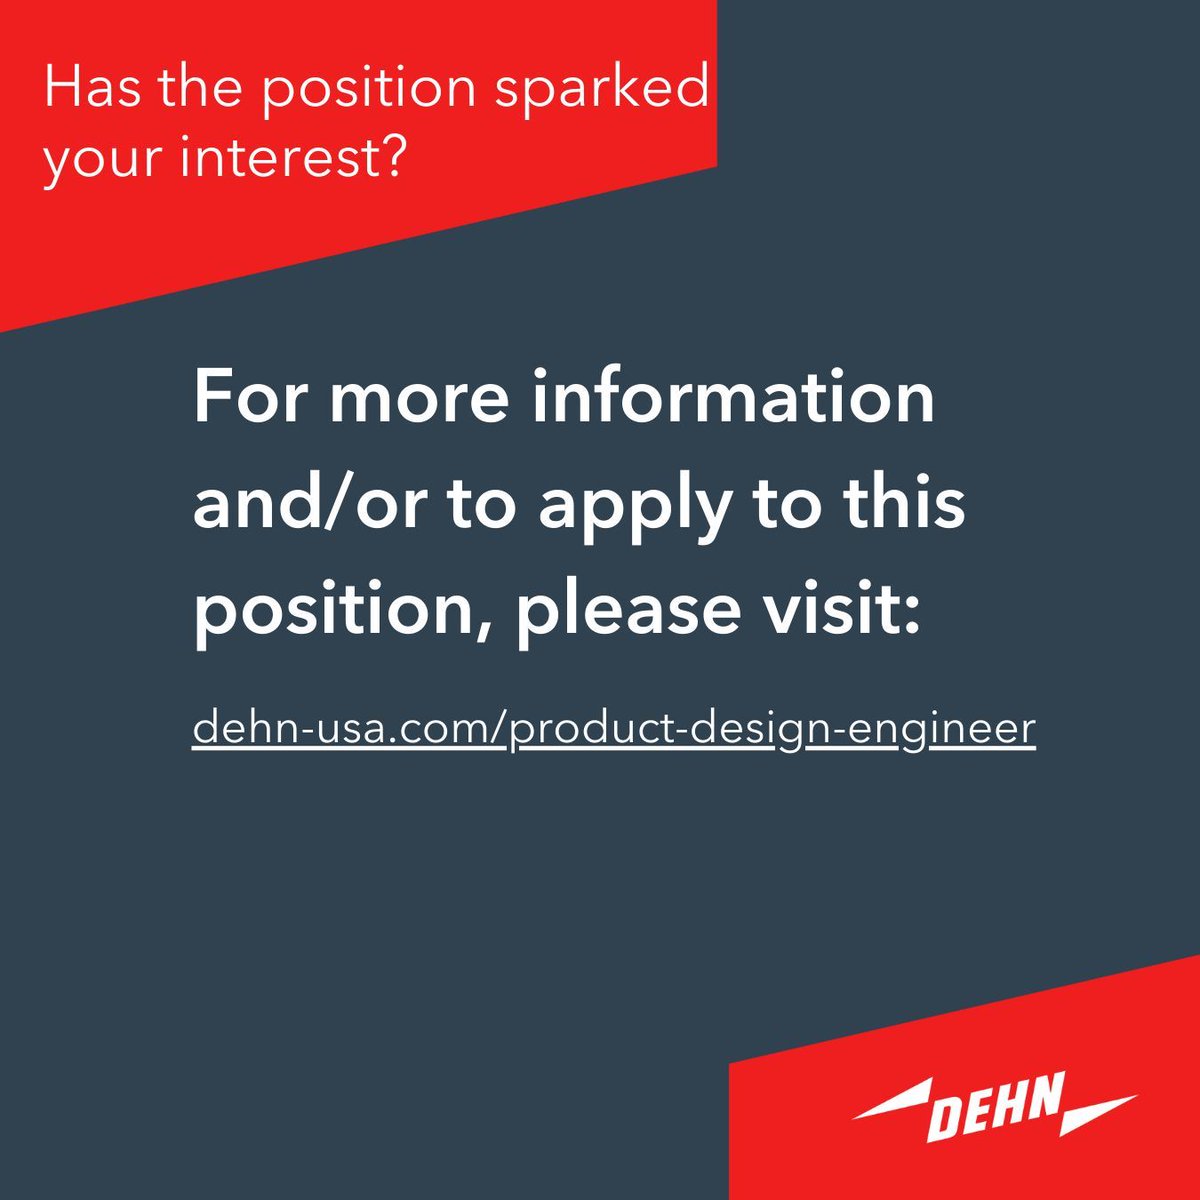 We are excited to announce a vacancy for a product design engineer position. Join our team and be part of a dynamic environment where your skills will be valued. Apply now and take the next step in your career! #DEHNprotects #joboffer